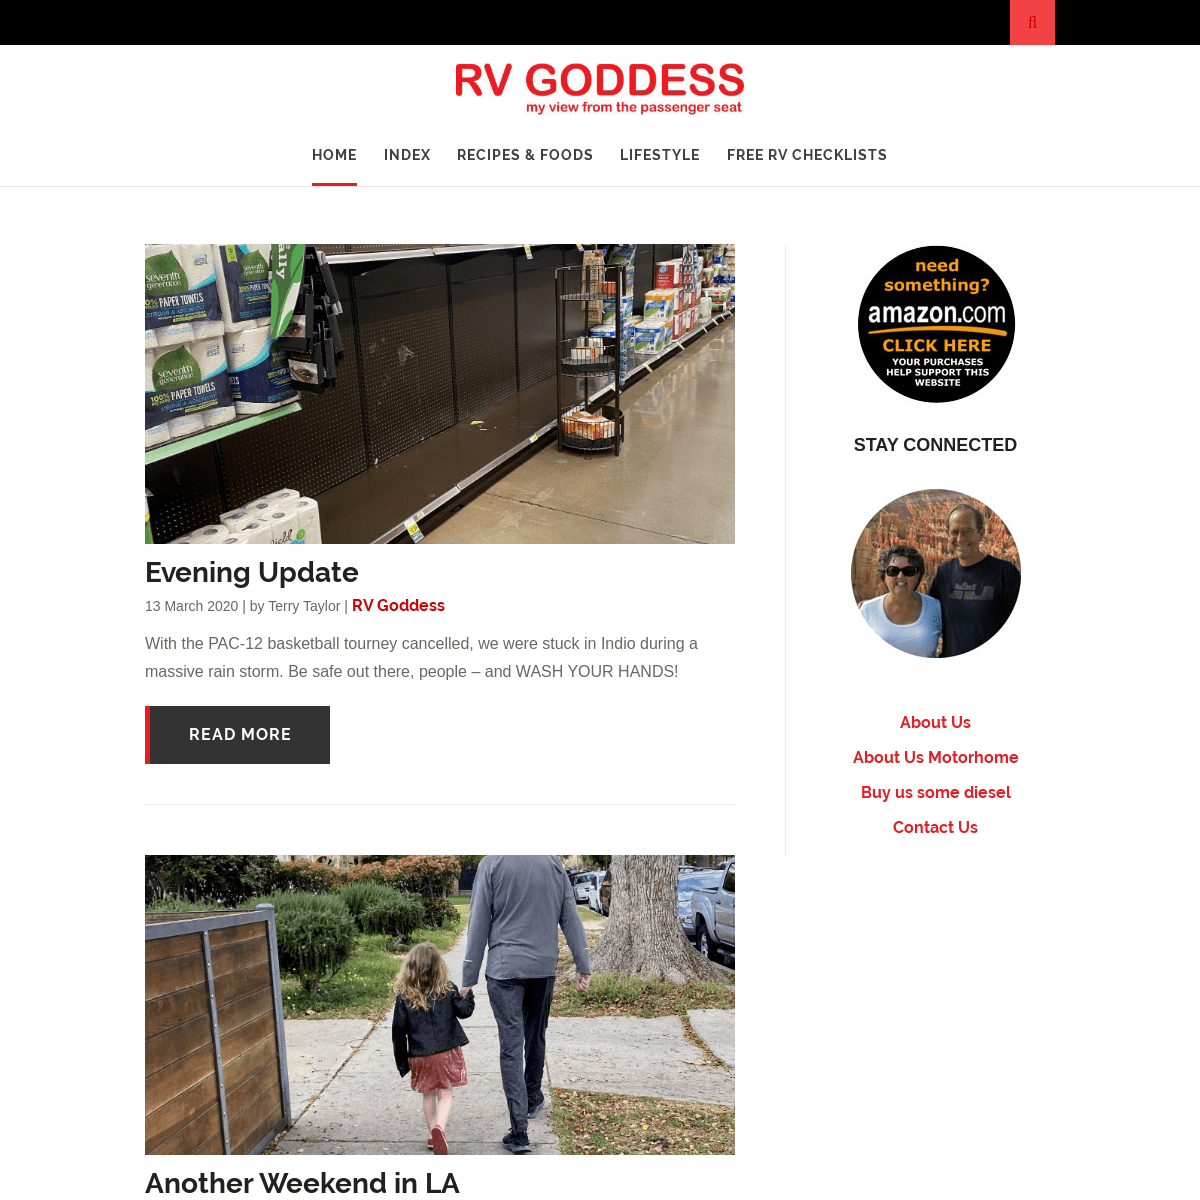 RV Goddess â€“ My view from the passenger seat